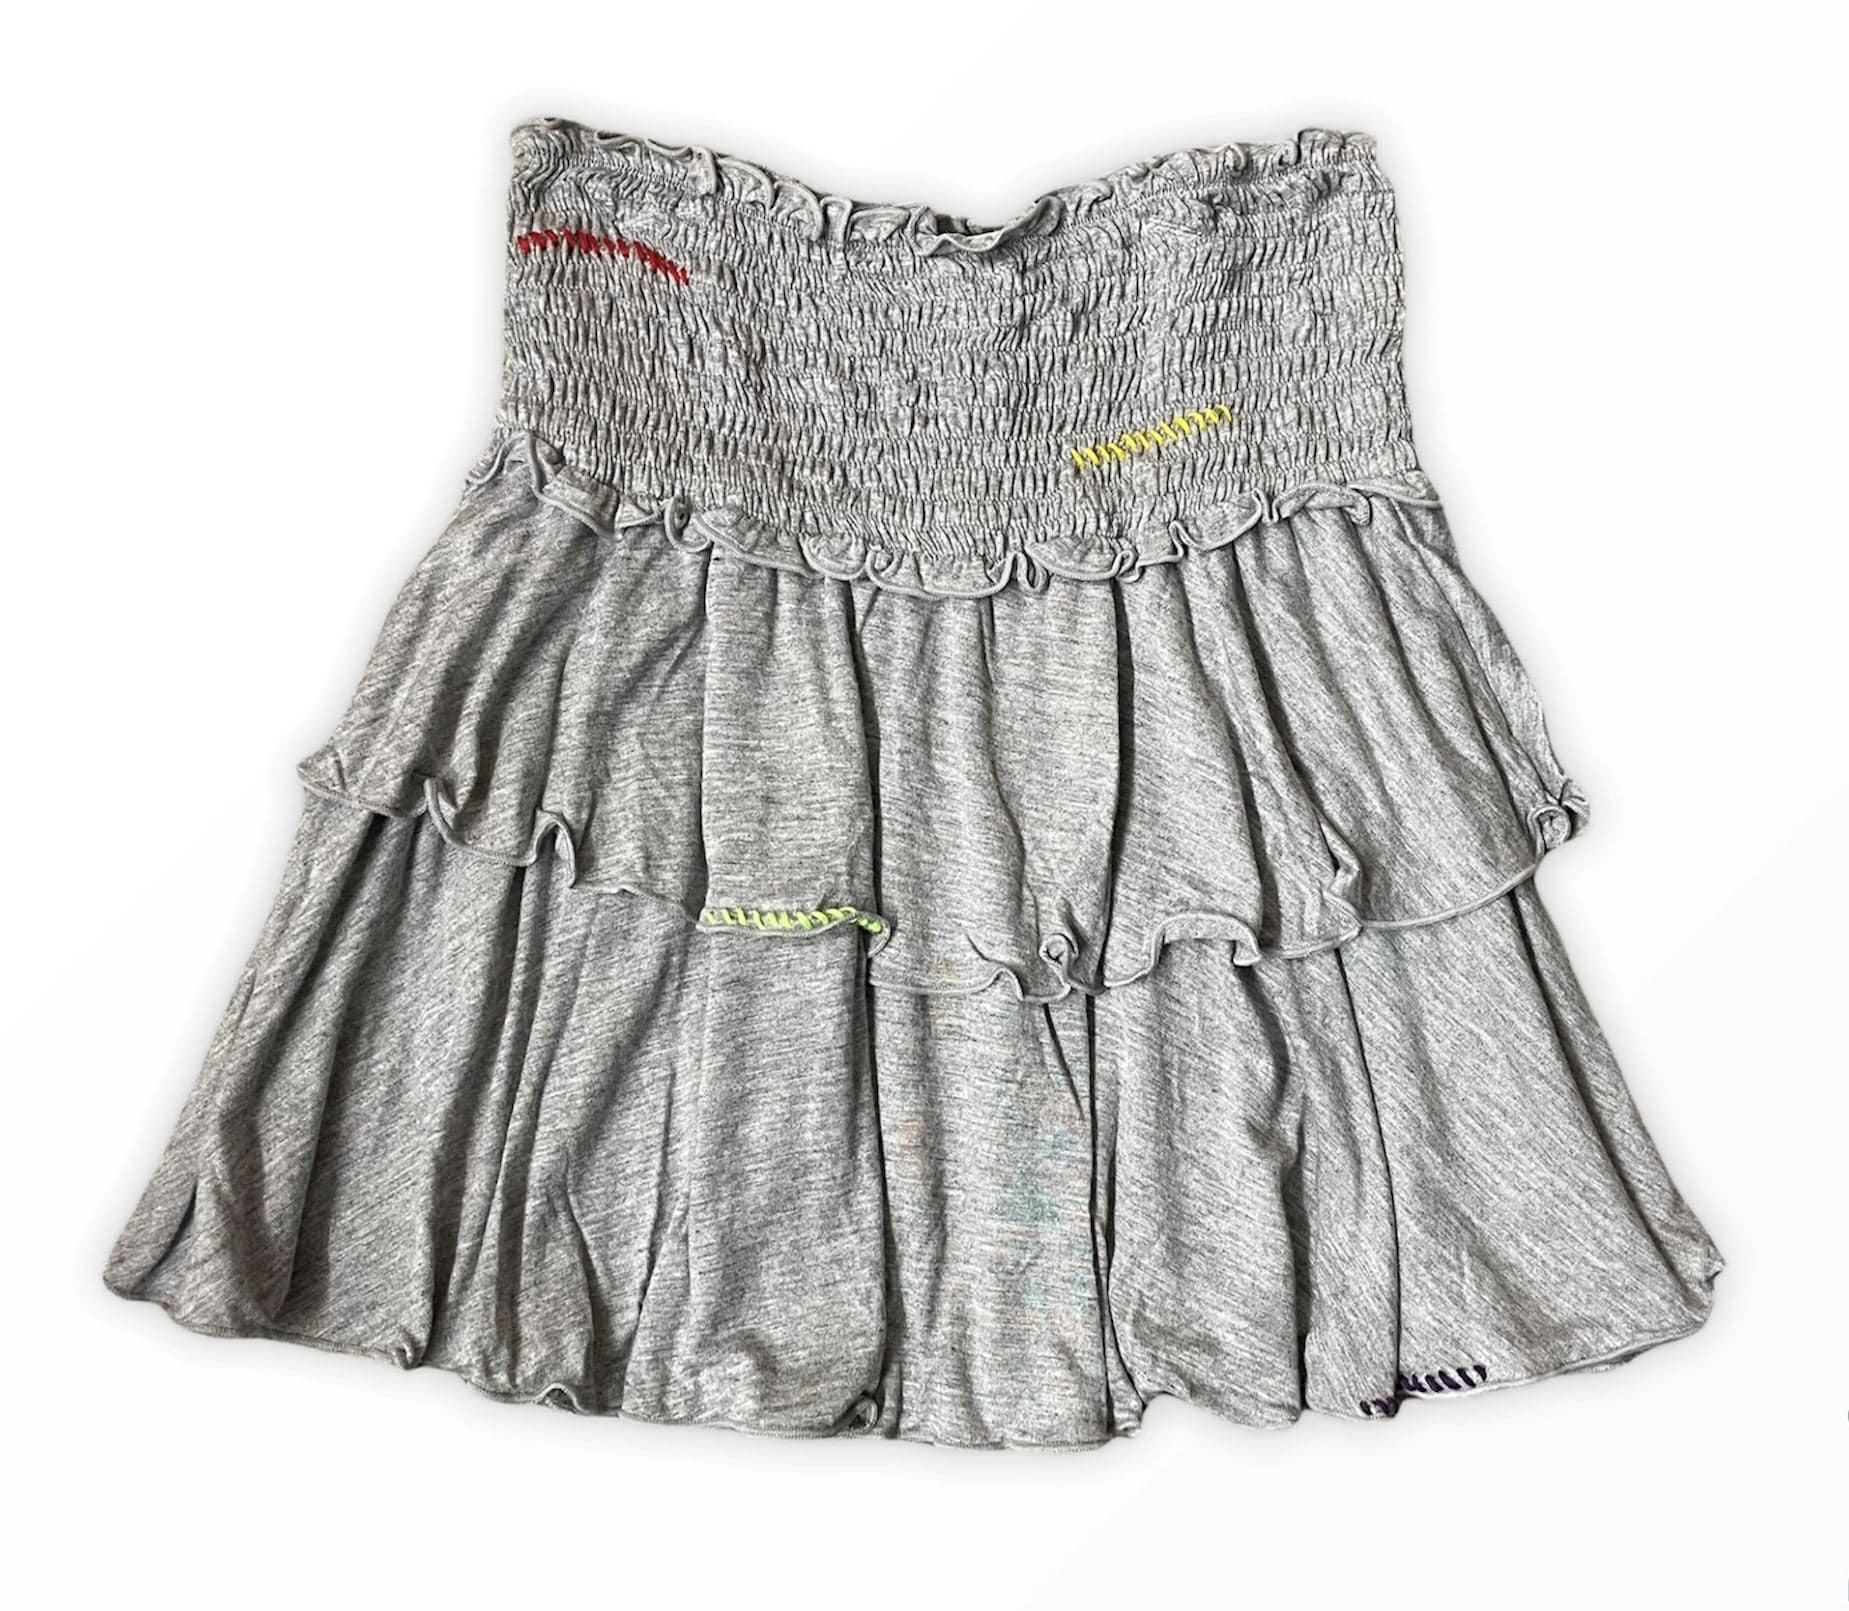 Stitched Skirt - Heather Grey - Twinkle Twinkle Little One